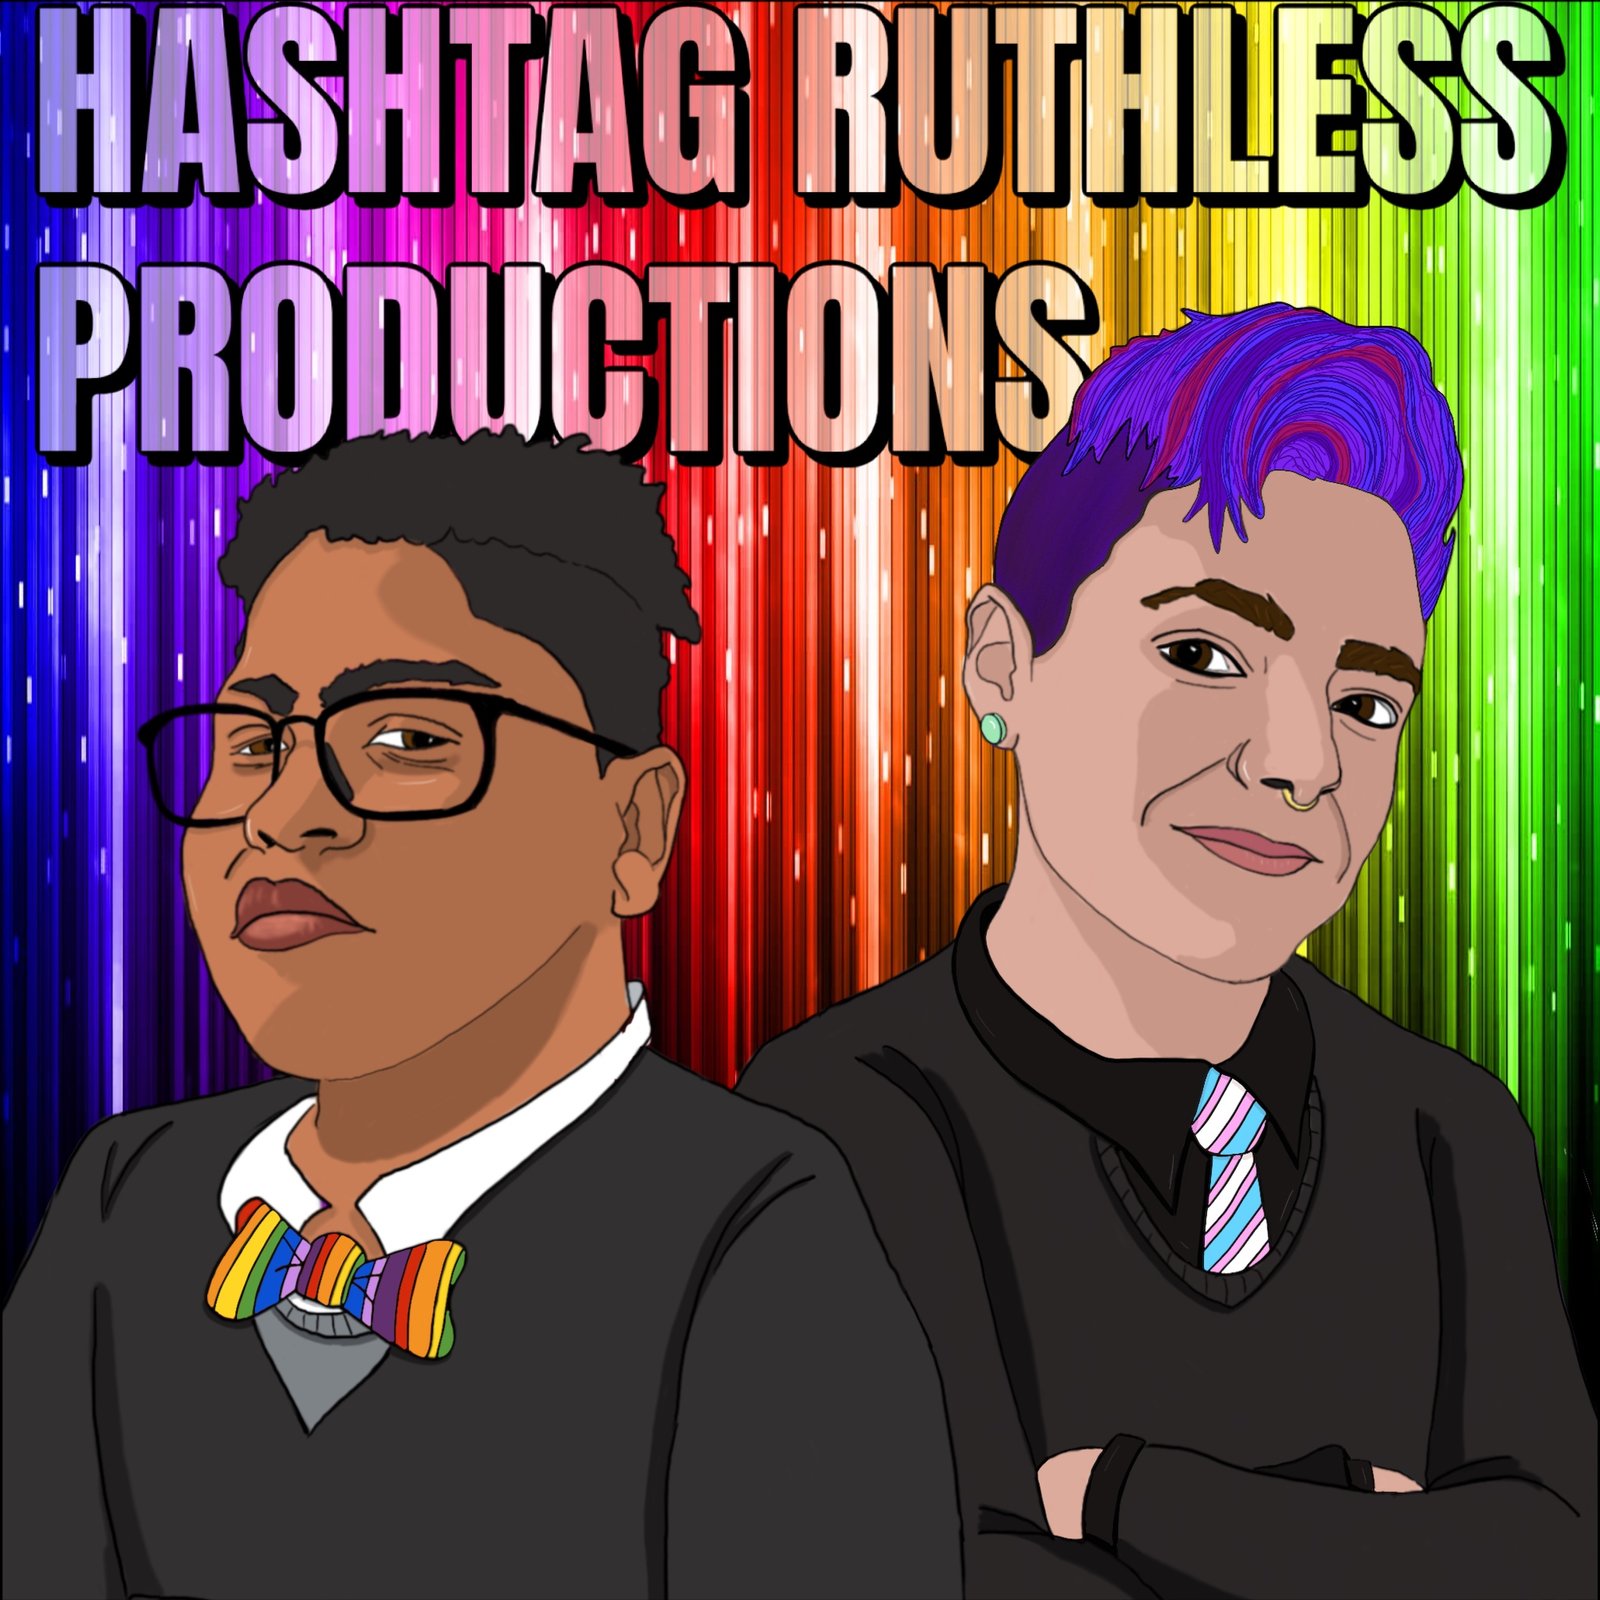 The logo for Hashtag Ruthless Productions